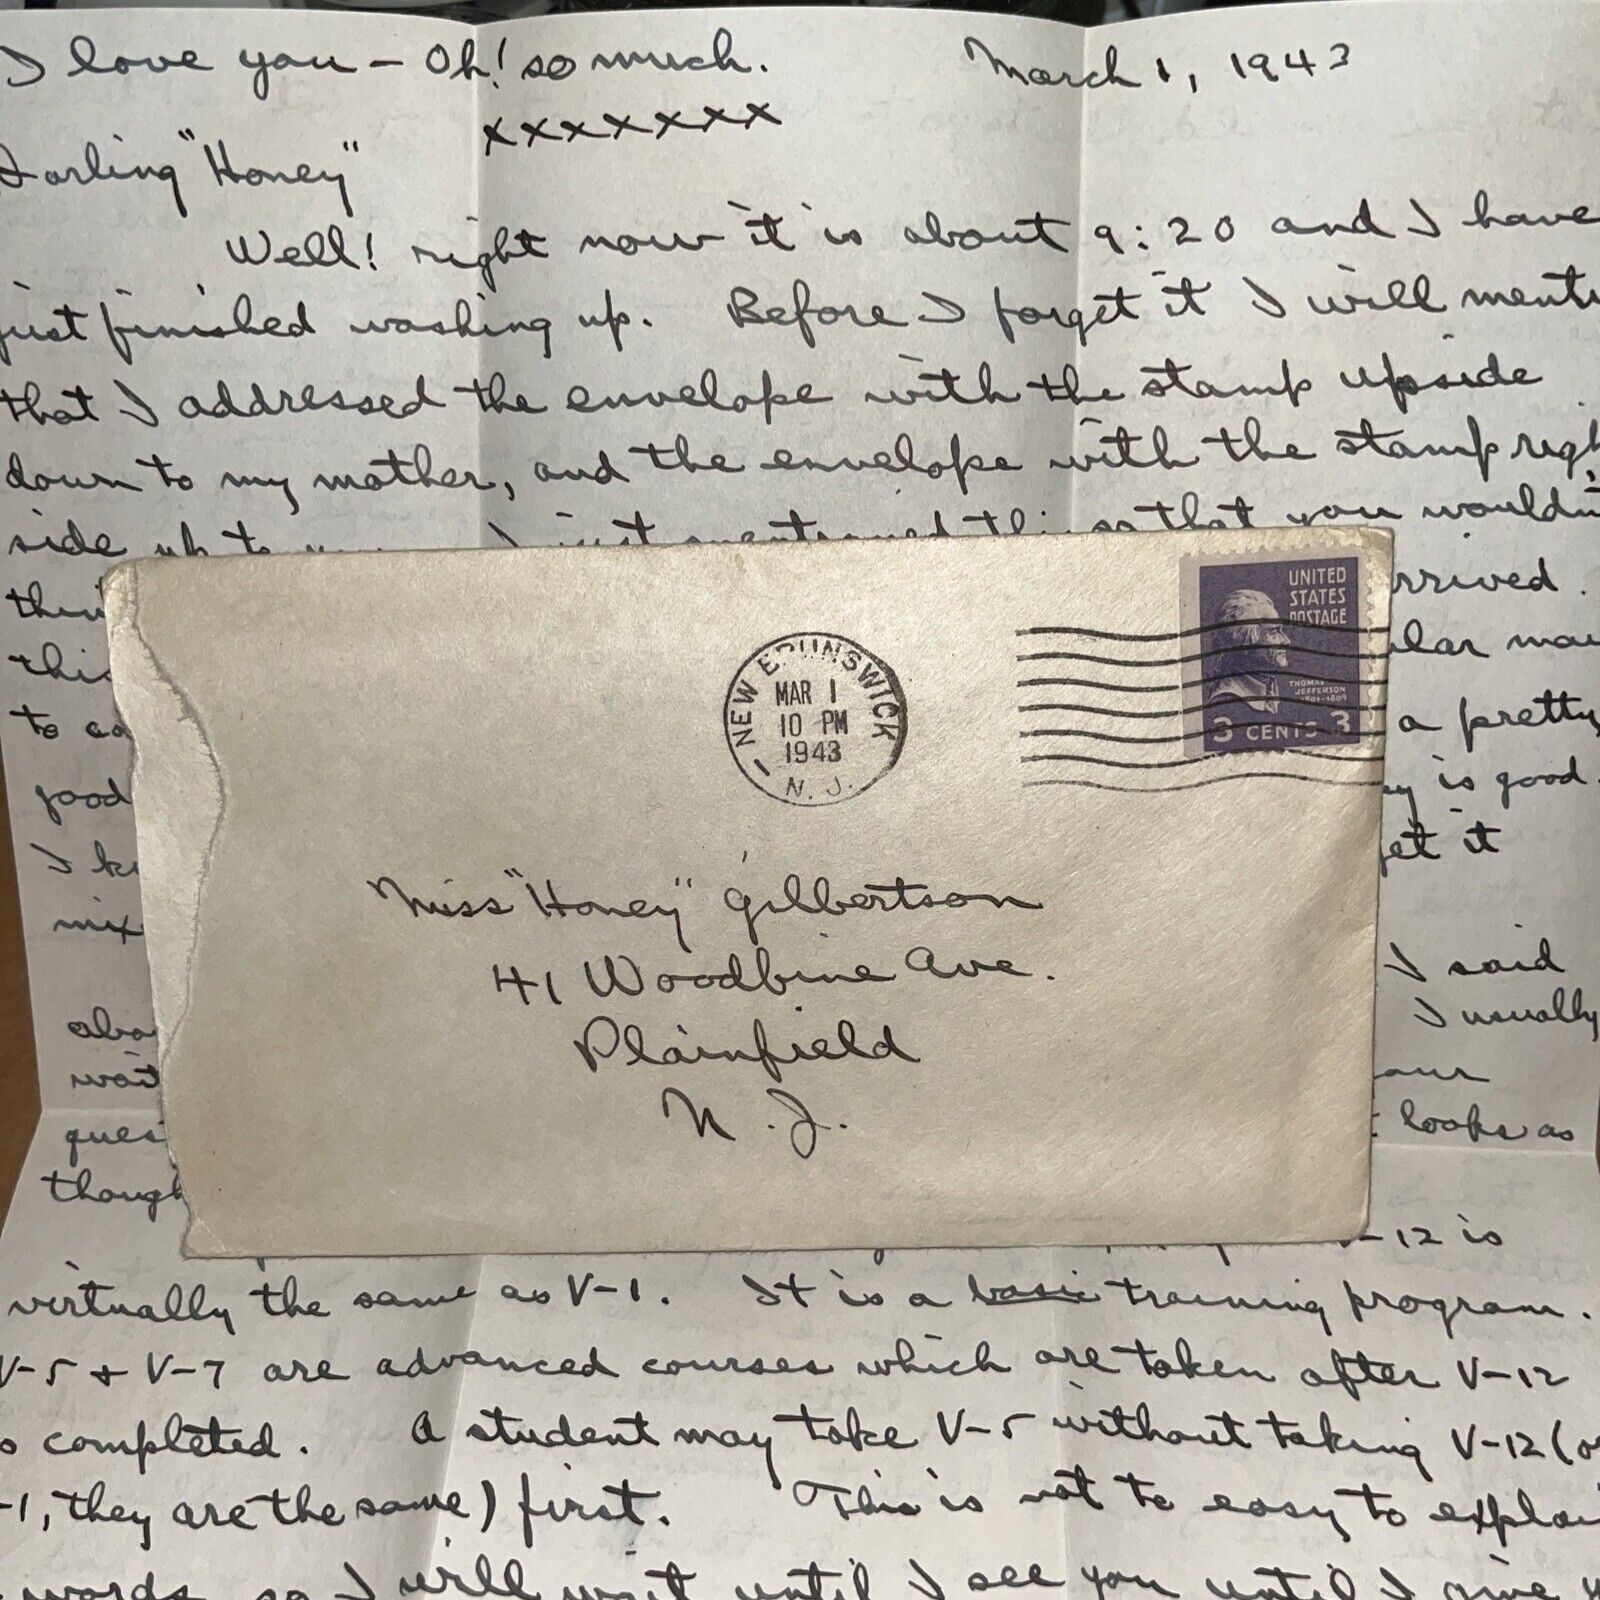 1943 Love Letter from Rutgers University Infirmary: Appears to be in Quarantine